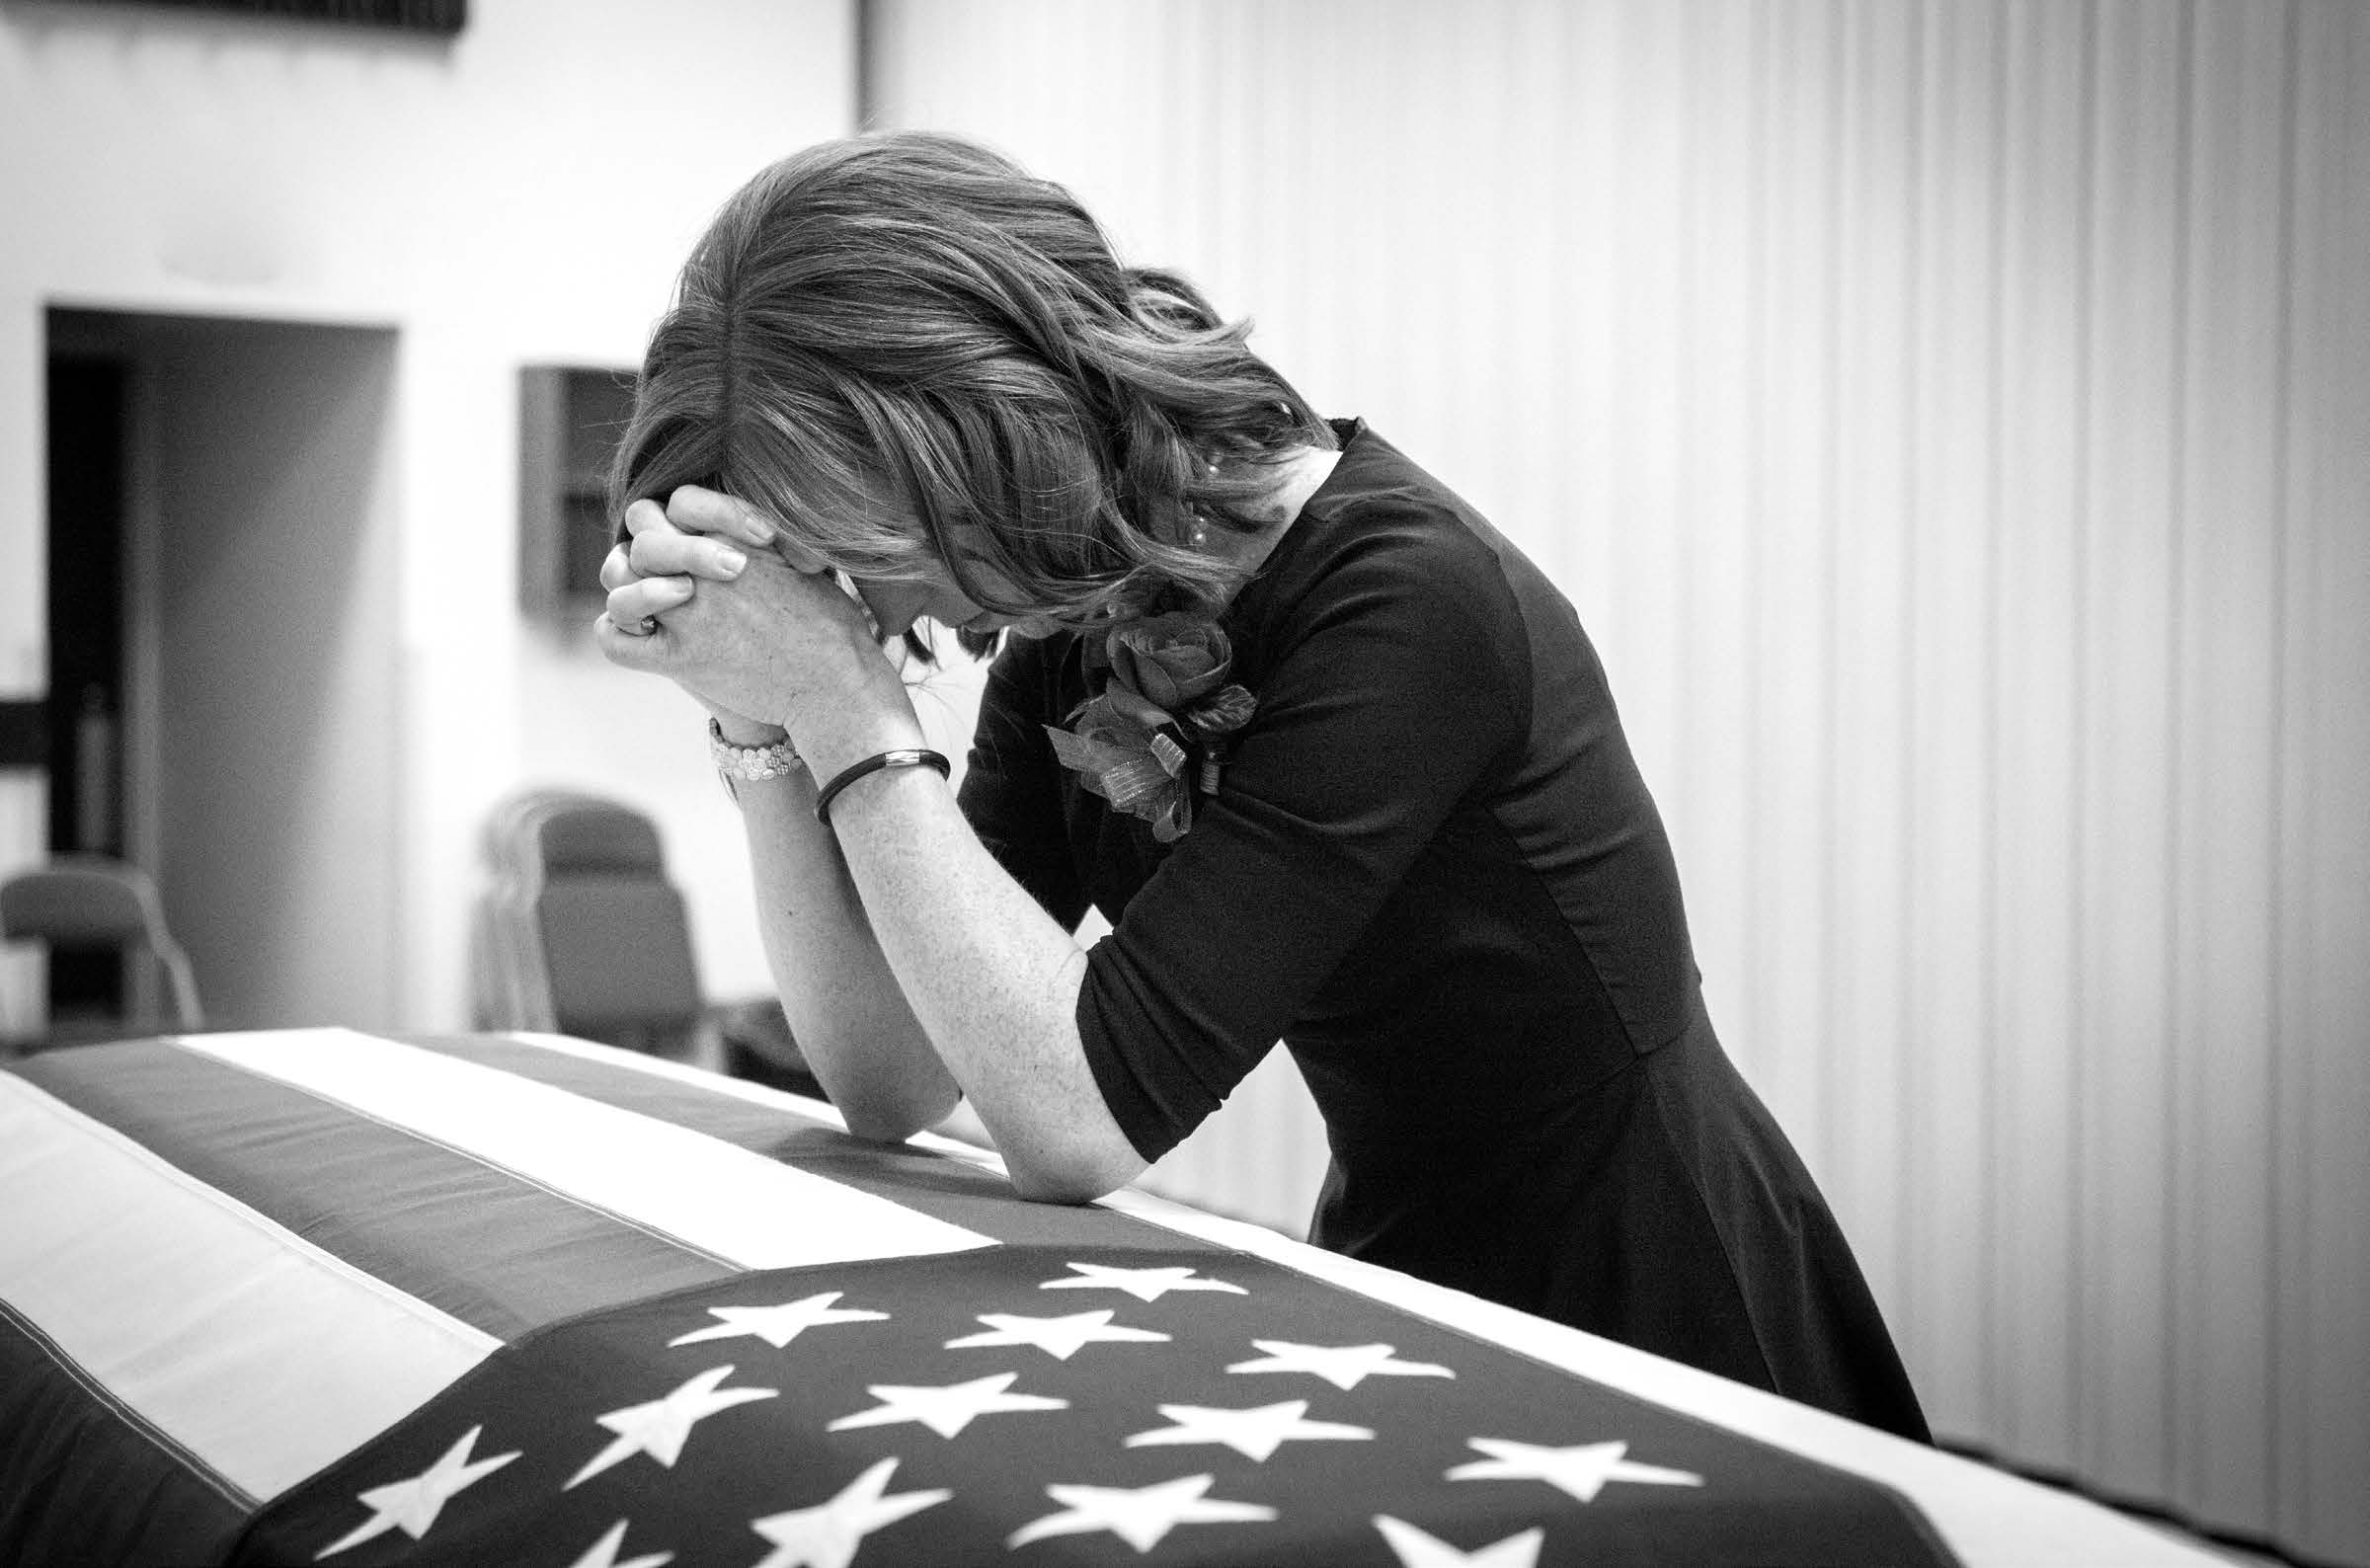 Jennie Taylor at the casket of her husband, Major Brent Taylor, who was killed in Afghanistan, in November 2018. Courtesy of Westbroek Studios.